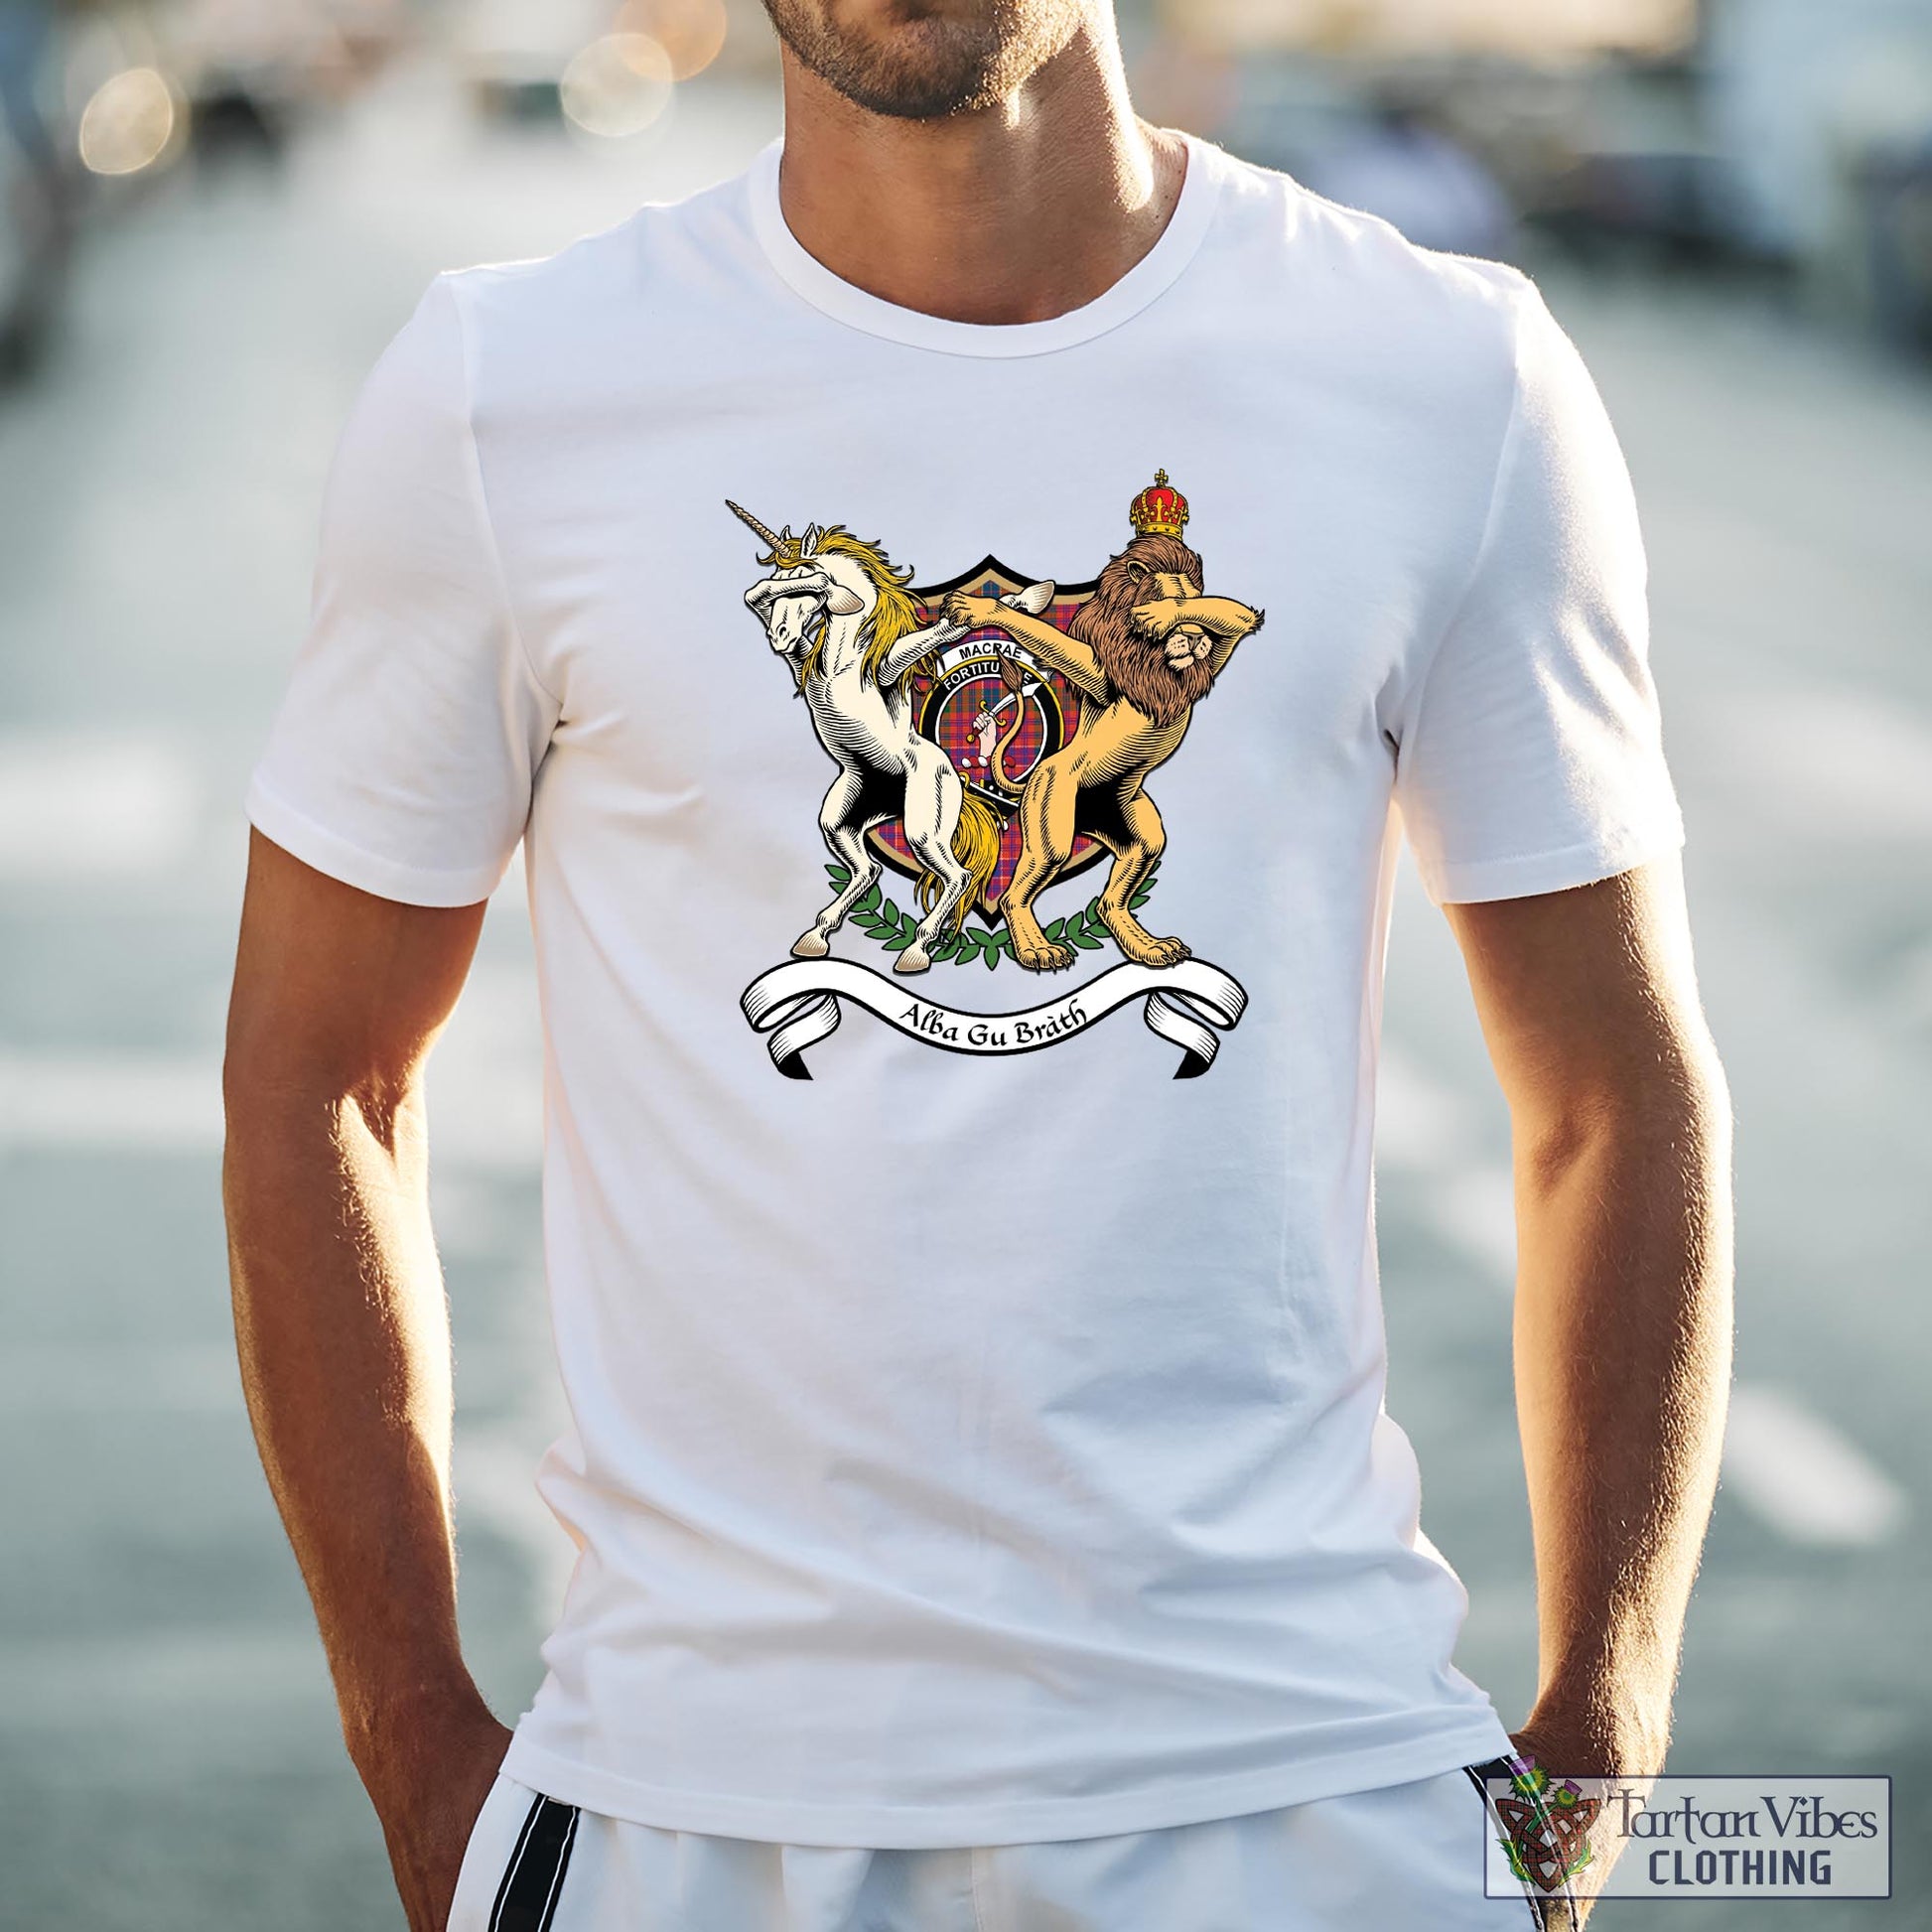 Tartan Vibes Clothing MacRae Ancient Family Crest Cotton Men's T-Shirt with Scotland Royal Coat Of Arm Funny Style